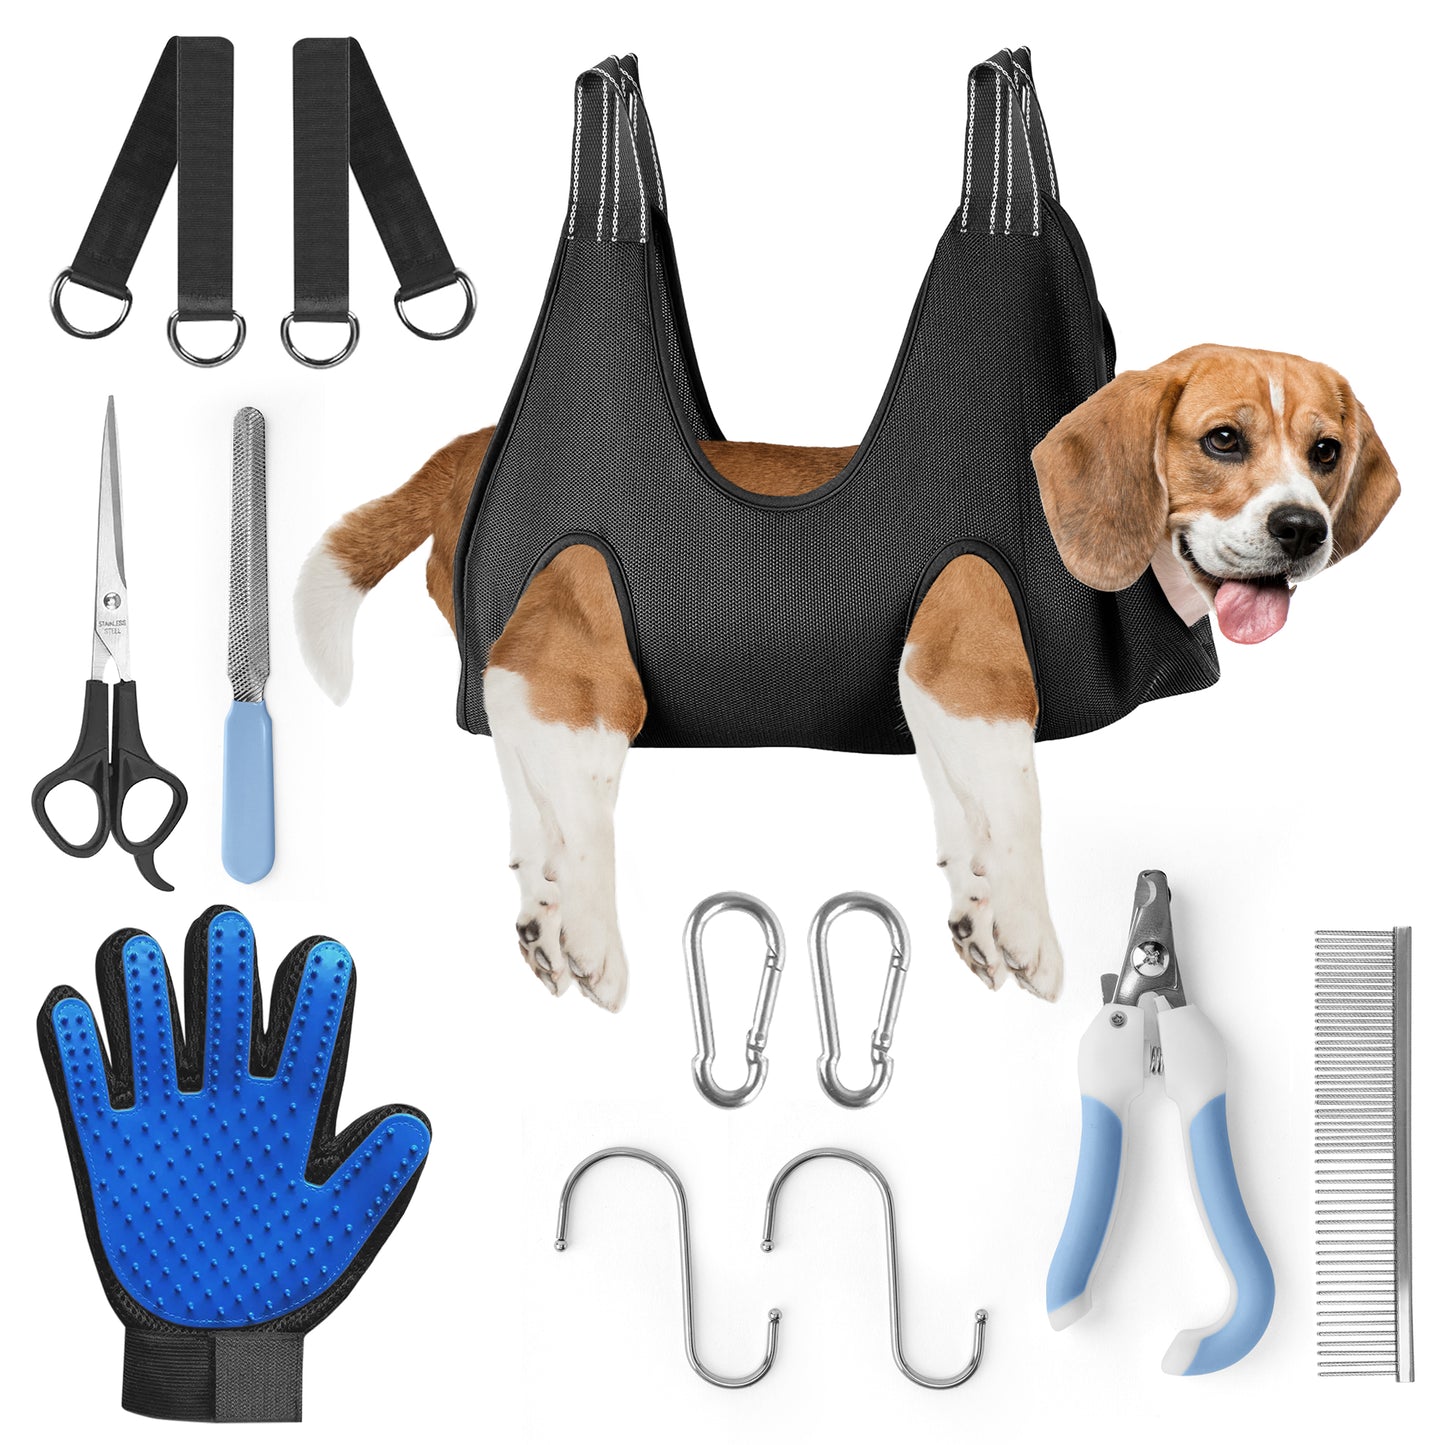 Small Dog Grooming Hammock - Pet Hammock for Grooming and Trimming Nails - With Comb, Nail Trimmer, Nail File - Dog Grooming Harness Sling for Nail Clipping - Hanging Restraint Holder for Dogs or Cat